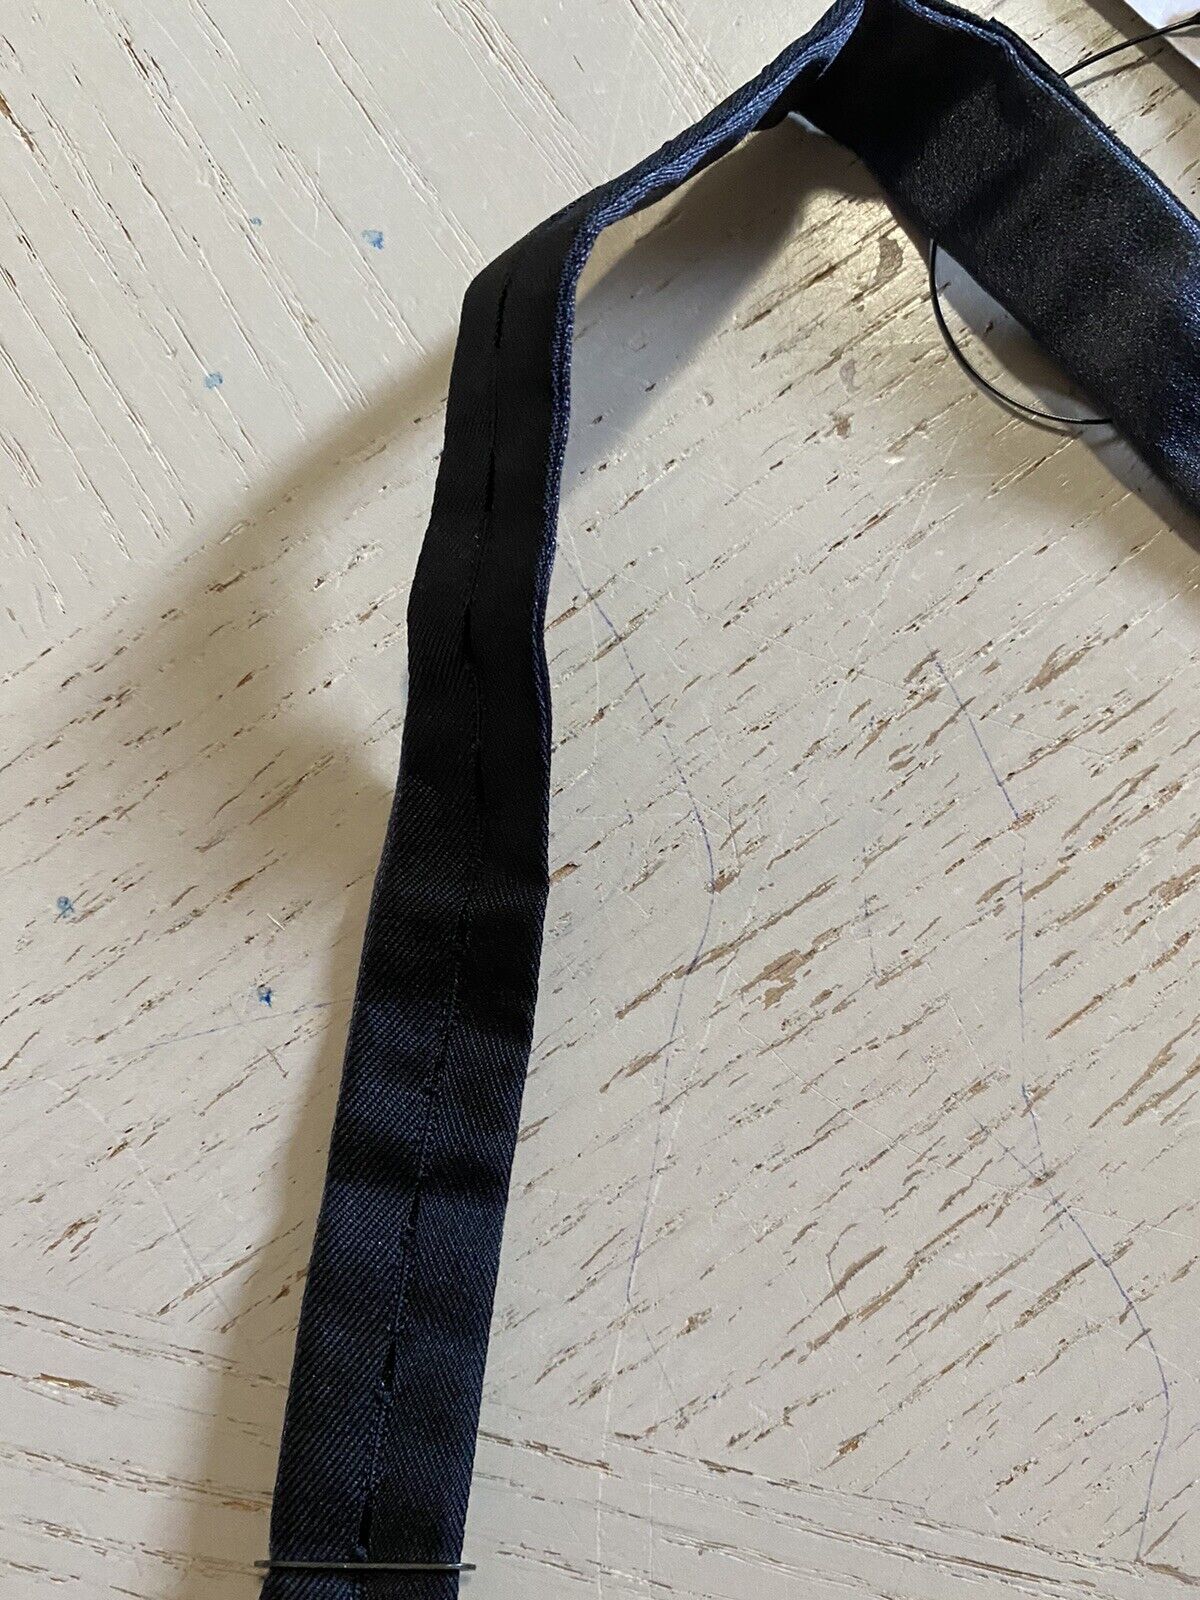 New  Gucci  Bow Tie DK Gray Made in Italy